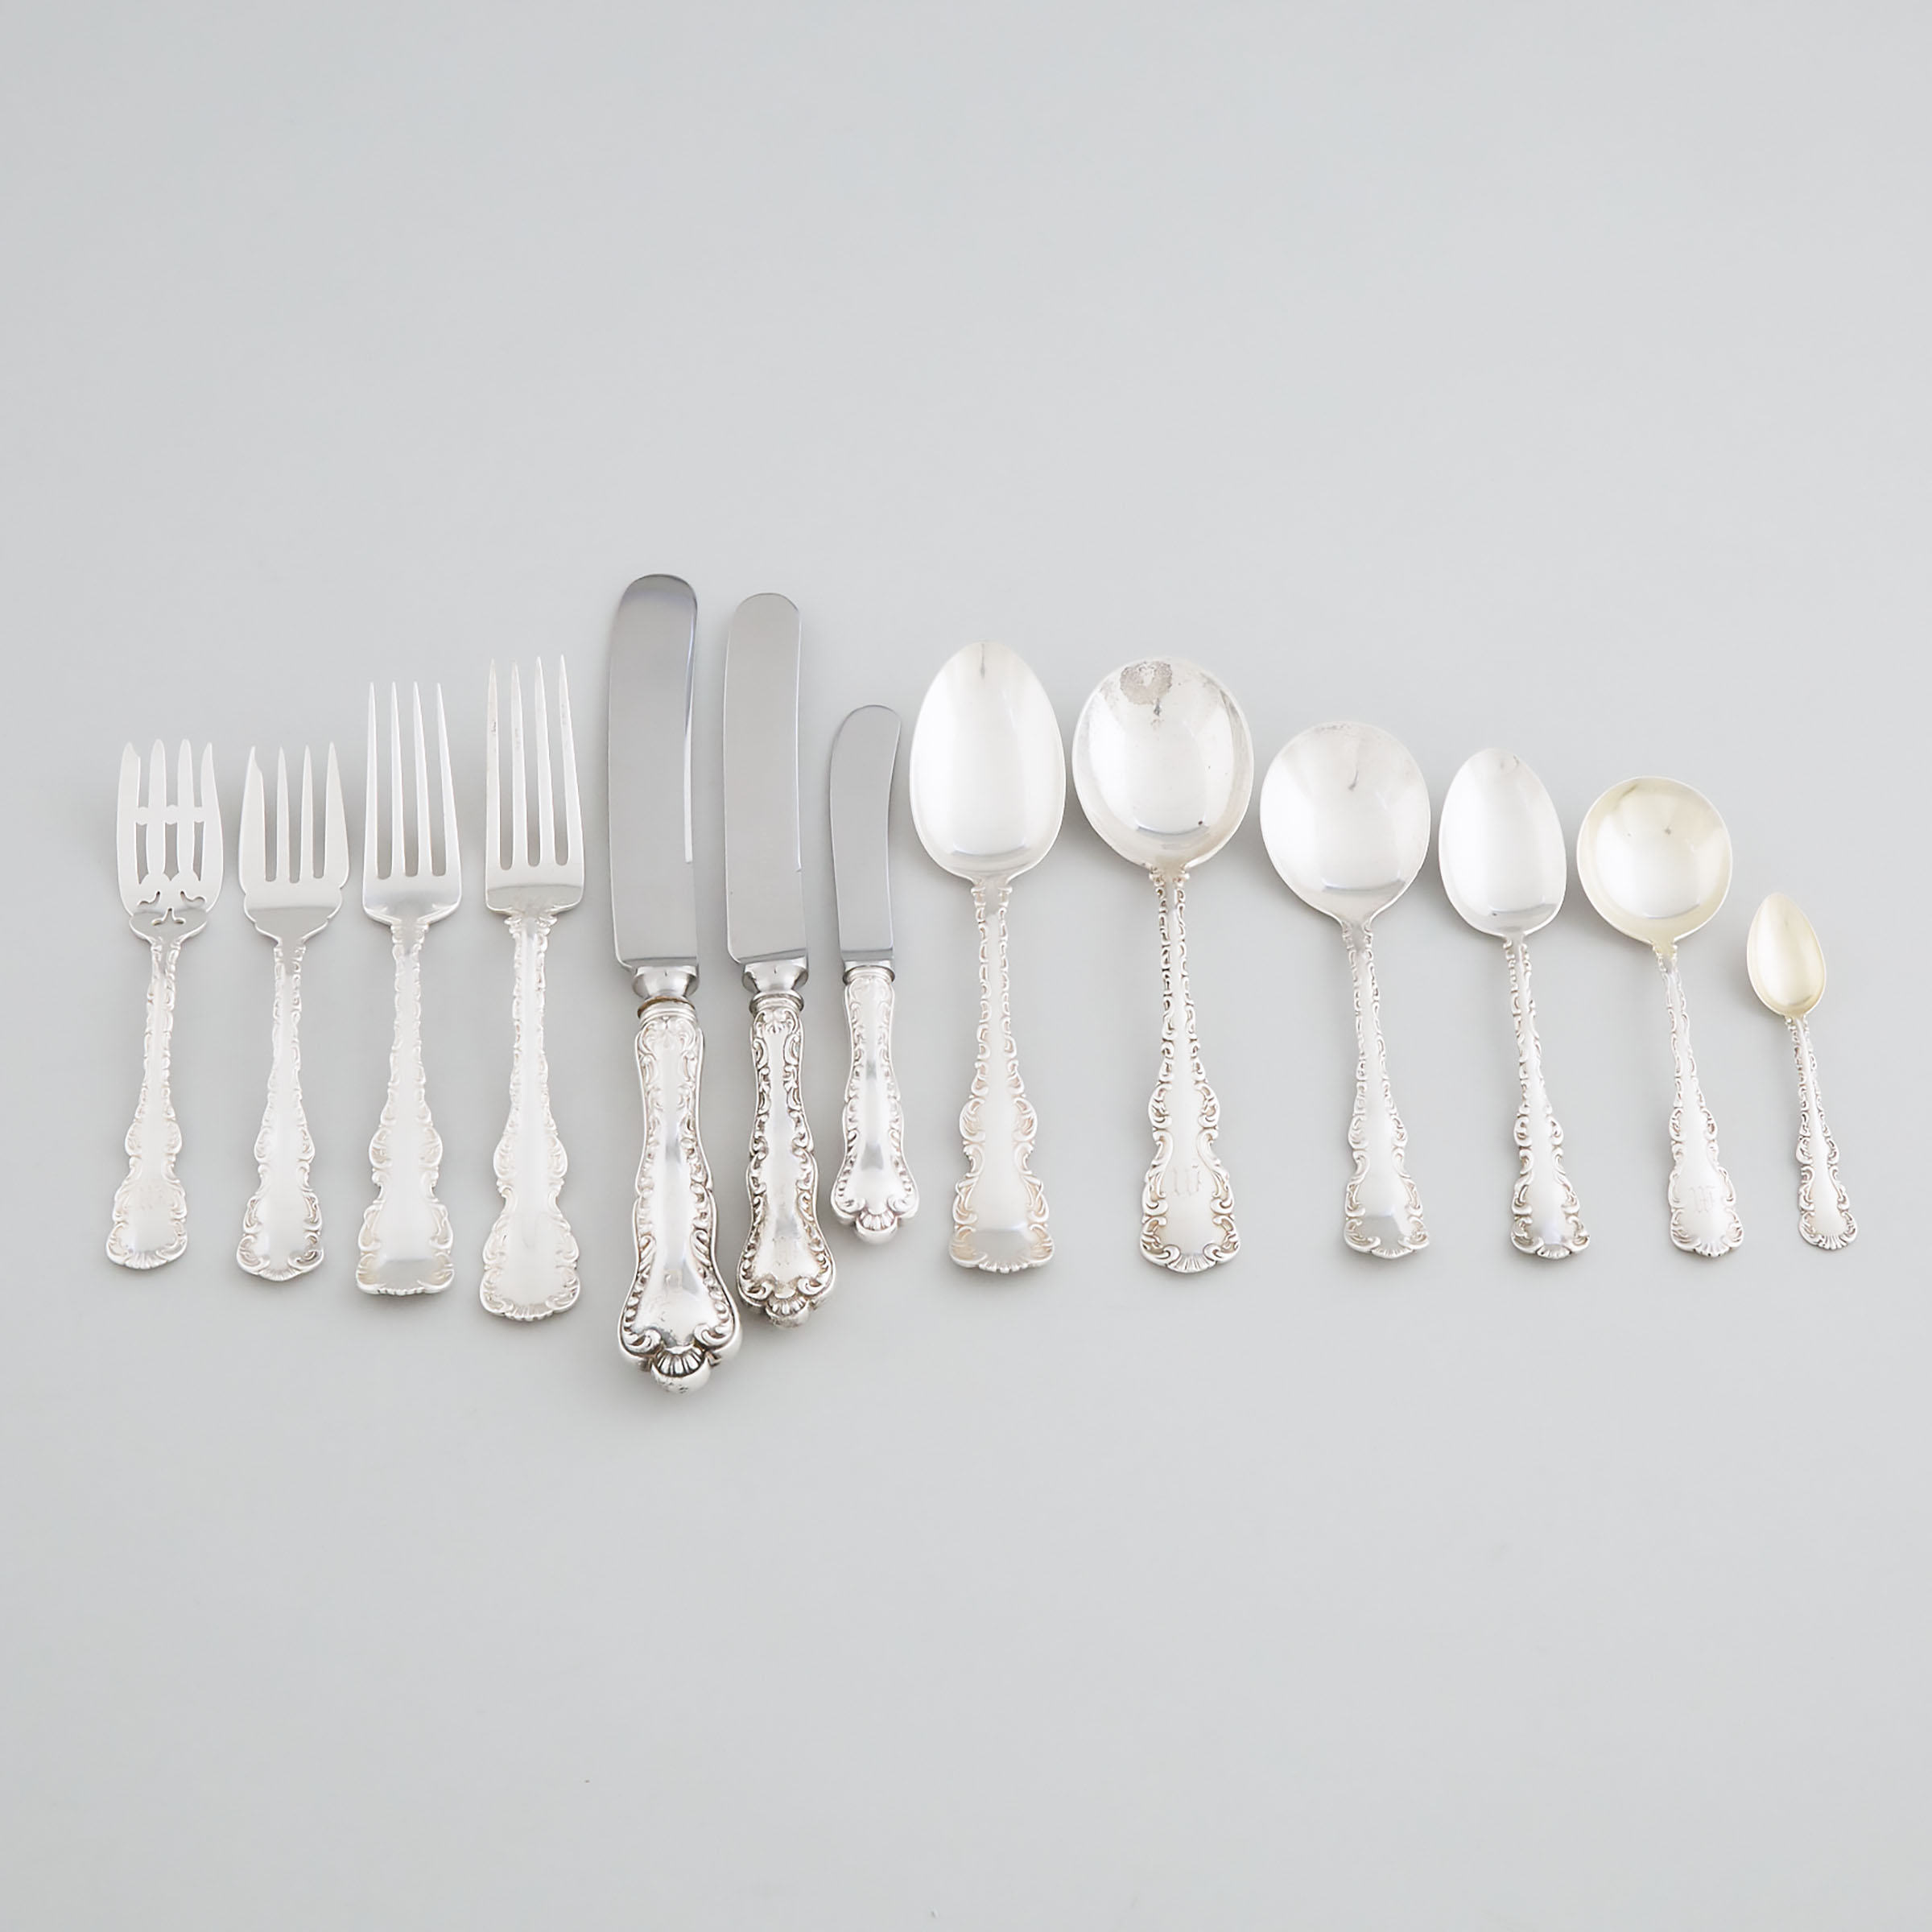 Assembled Canadian Silver 'Louis XV' Pattern Flatware Service, mainly Henry Birks & Sons, Montreal, Que., 20th century